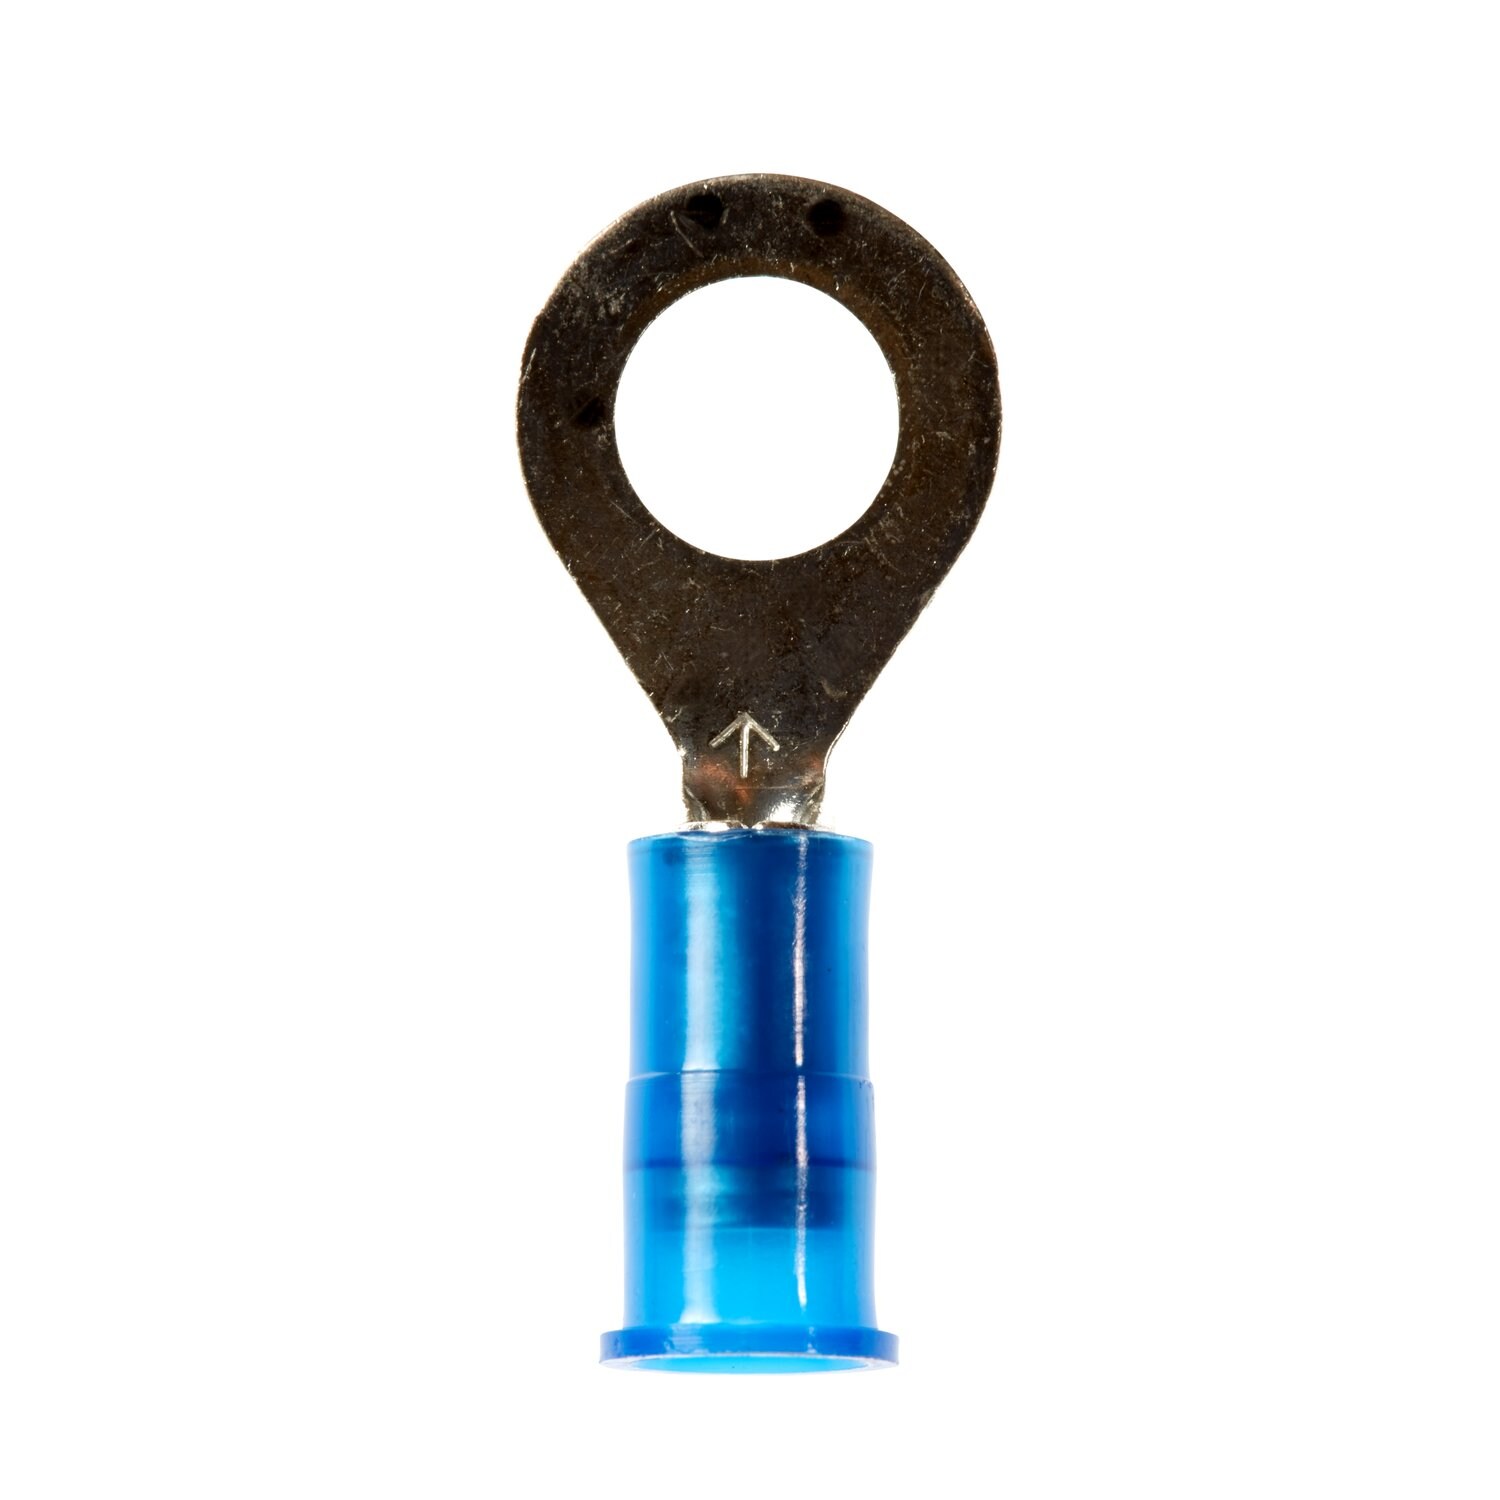 7000132248 - 3M Scotchlok Ring Tongue, Nylon Insulated w/Insulation Grip
MNG14-14R/SK, Stud Size 1/4, 1000/Case